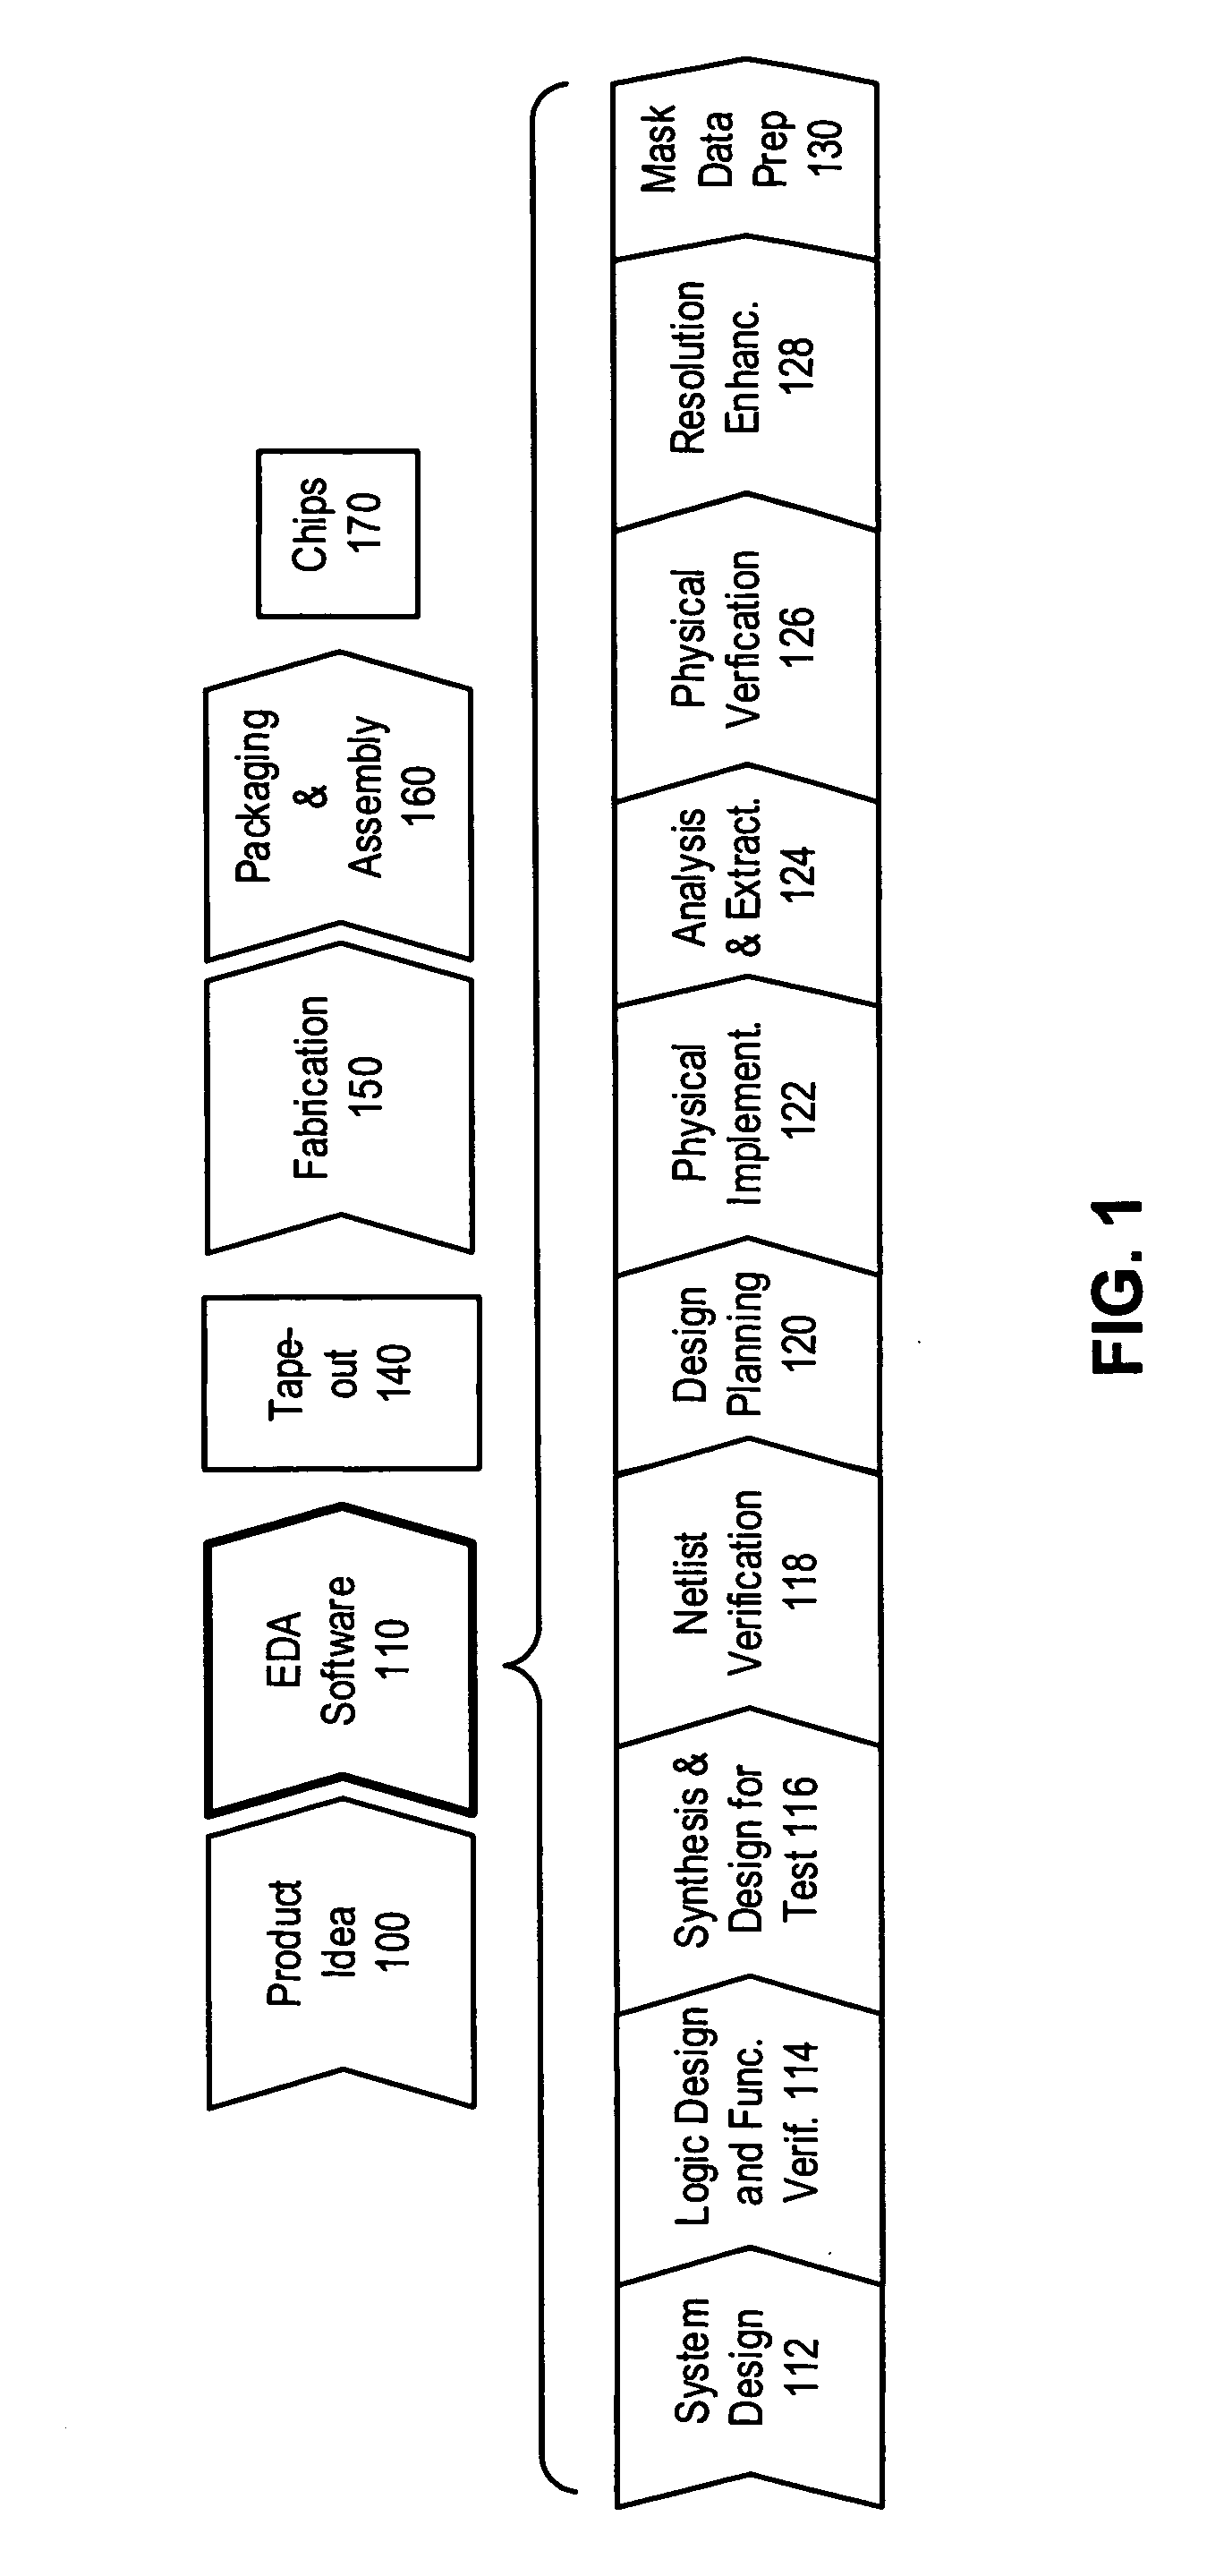 Method and apparatus for quickly determining the effect of placing an assist feature at a location in a layout